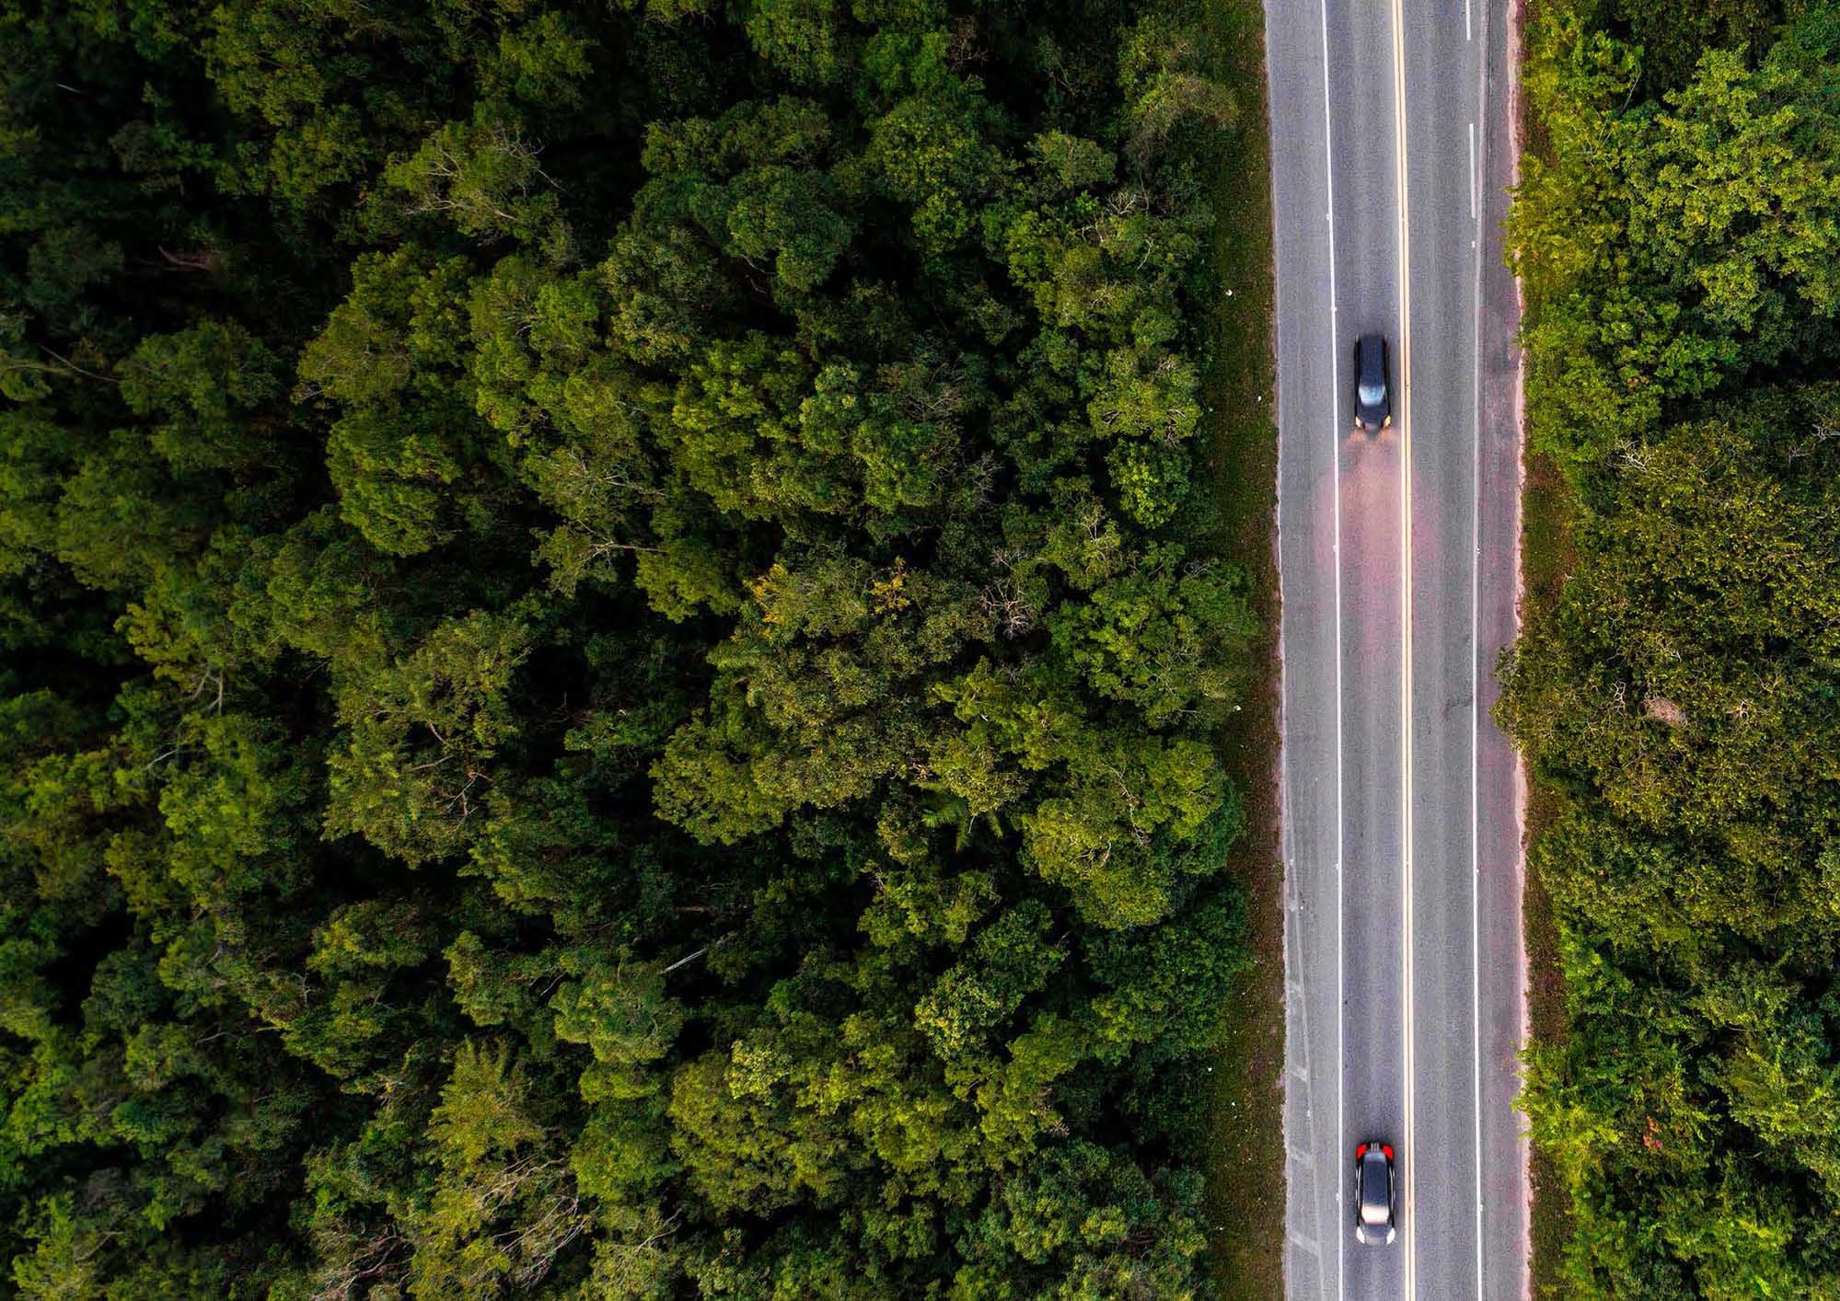 Aerial view of two cars driving on a road with trees either side.